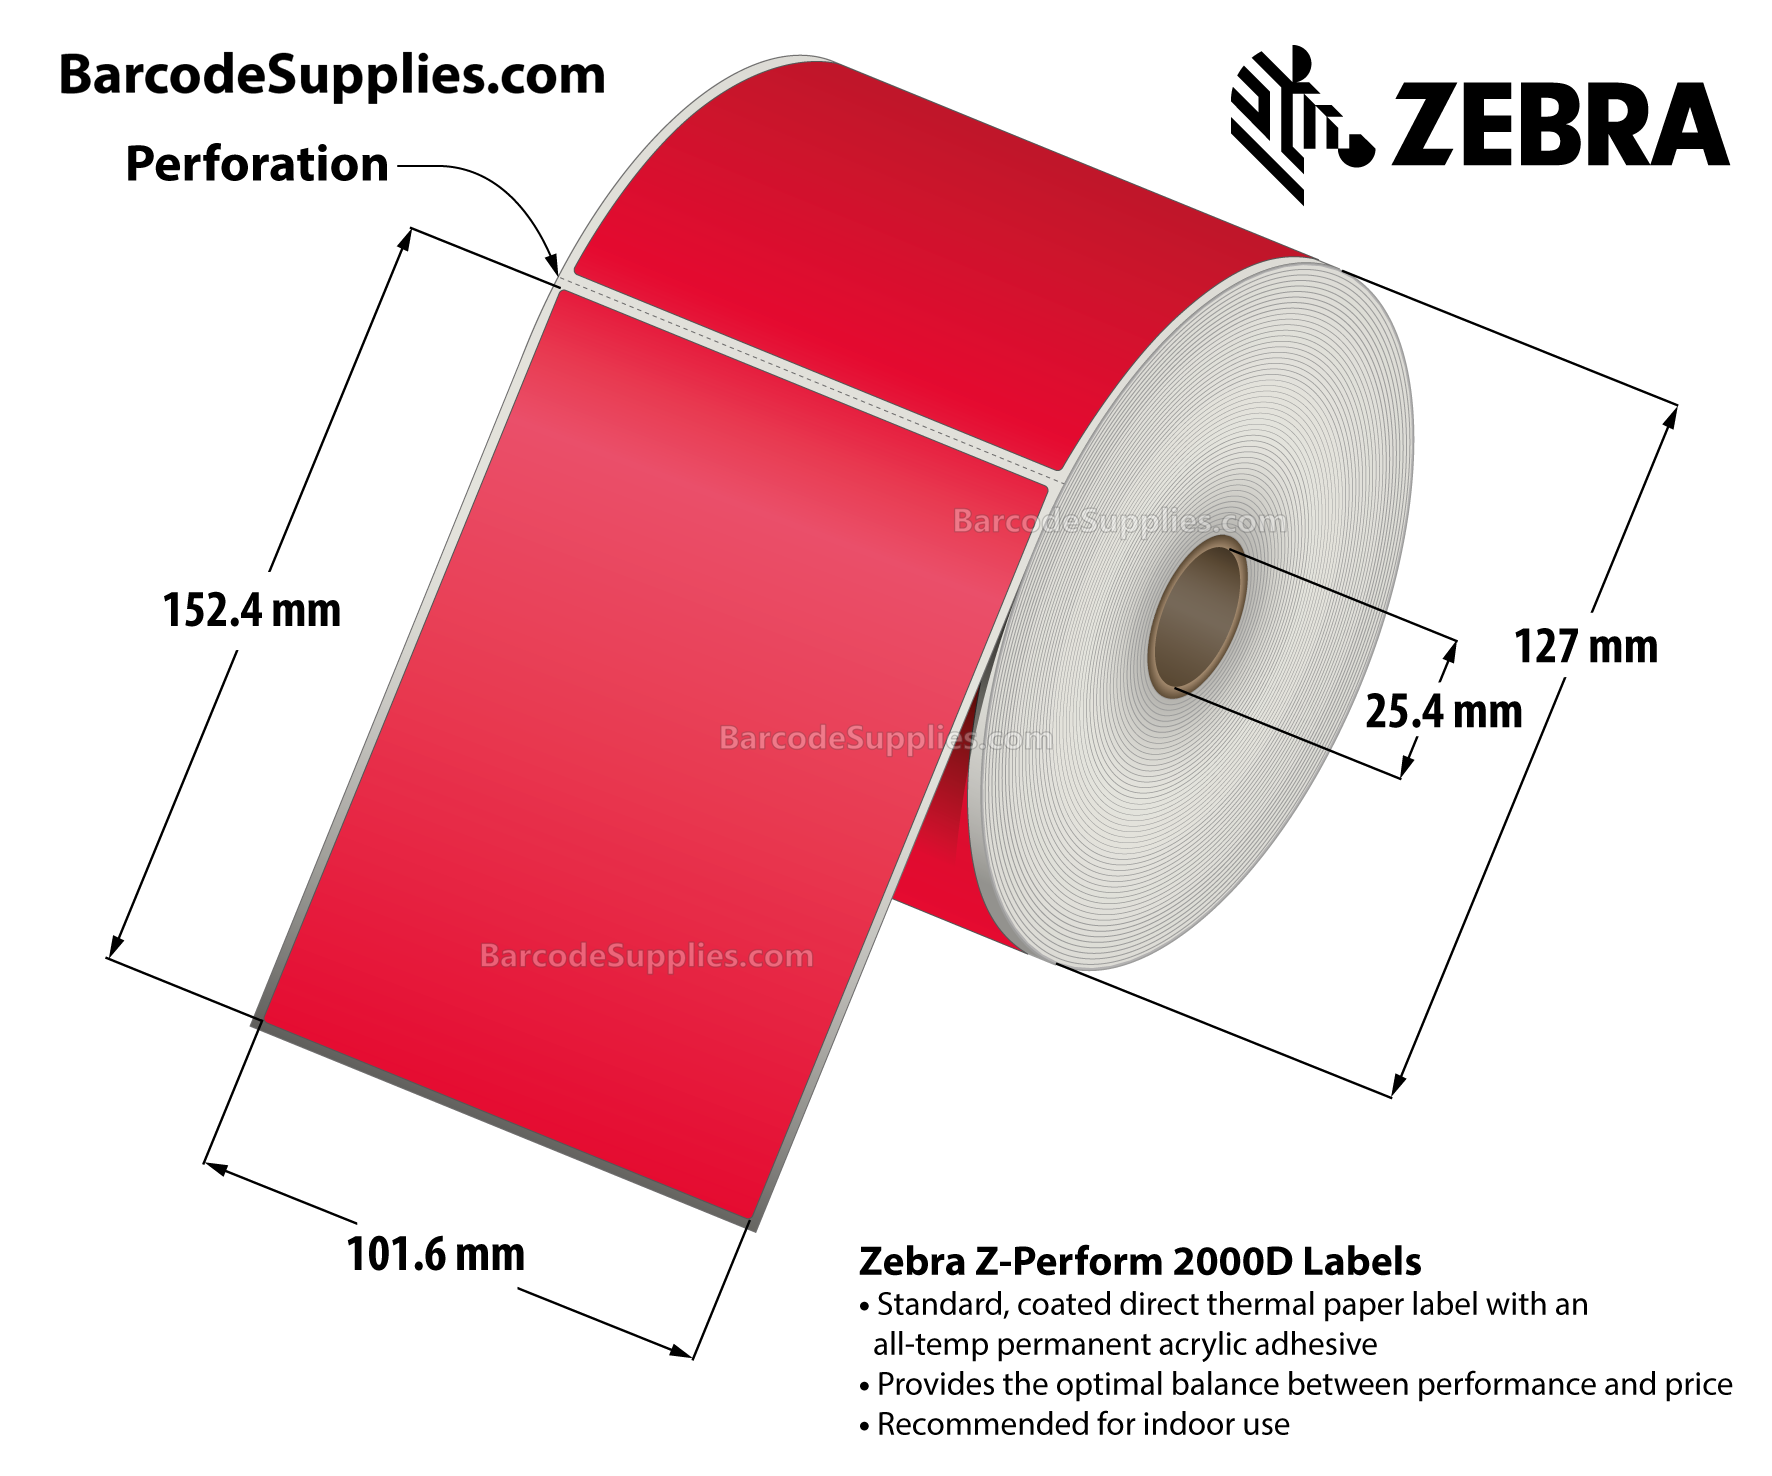 4 x 6 Direct Thermal Red - PMS 185 Z-Perform 2000D Floodcoated (Red) Labels With All-Temp Adhesive - Perforated - 430 Labels Per Roll - Carton Of 6 Rolls - 2580 Labels Total - MPN: 10010035-3